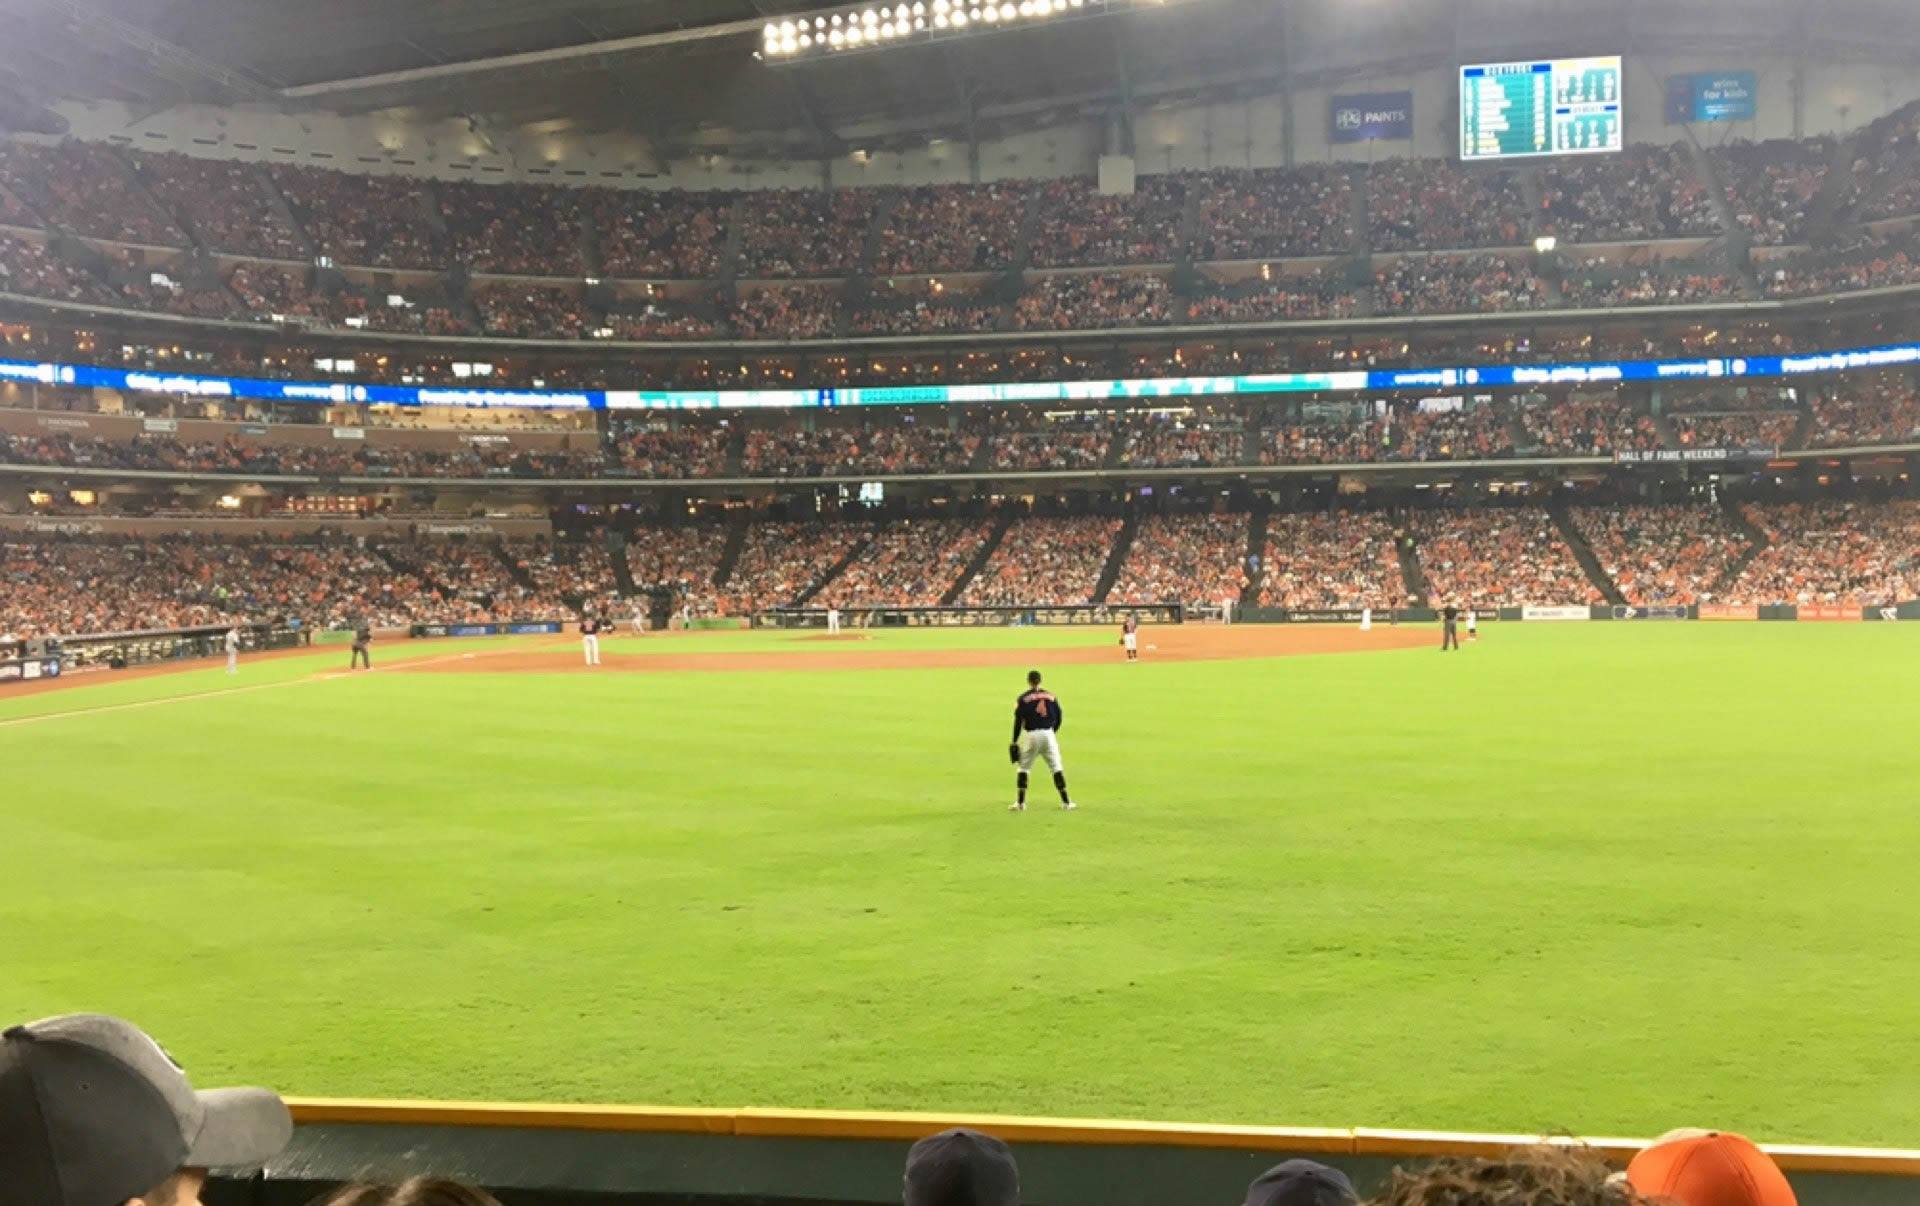 section 153, row 6 seat view  for baseball - minute maid park